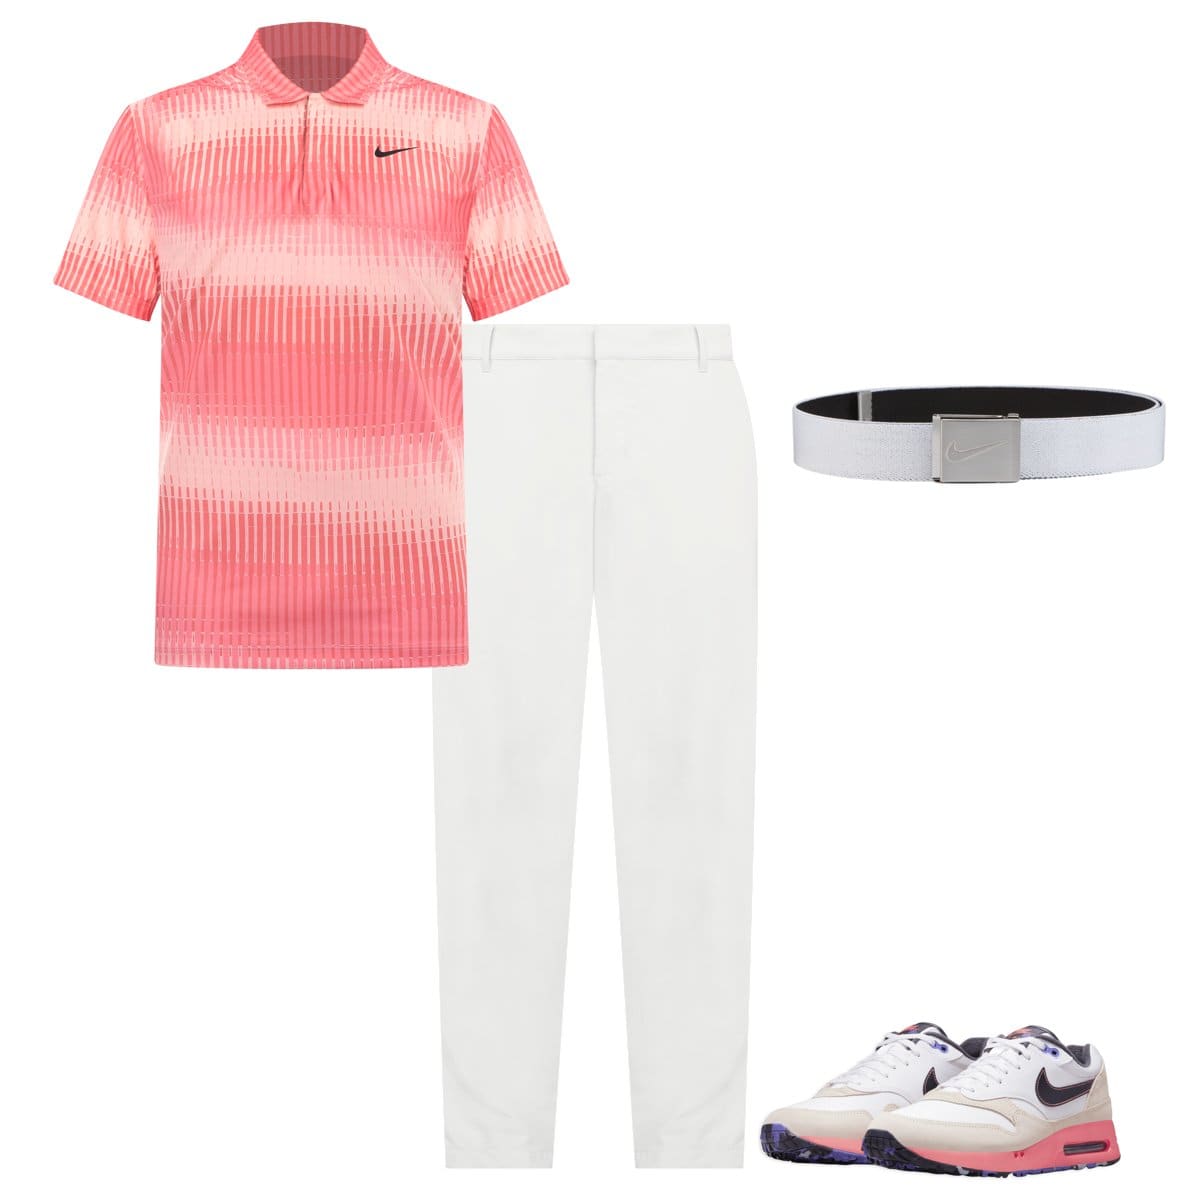 Golf Outfits for Men. Have you man look great on the golf course